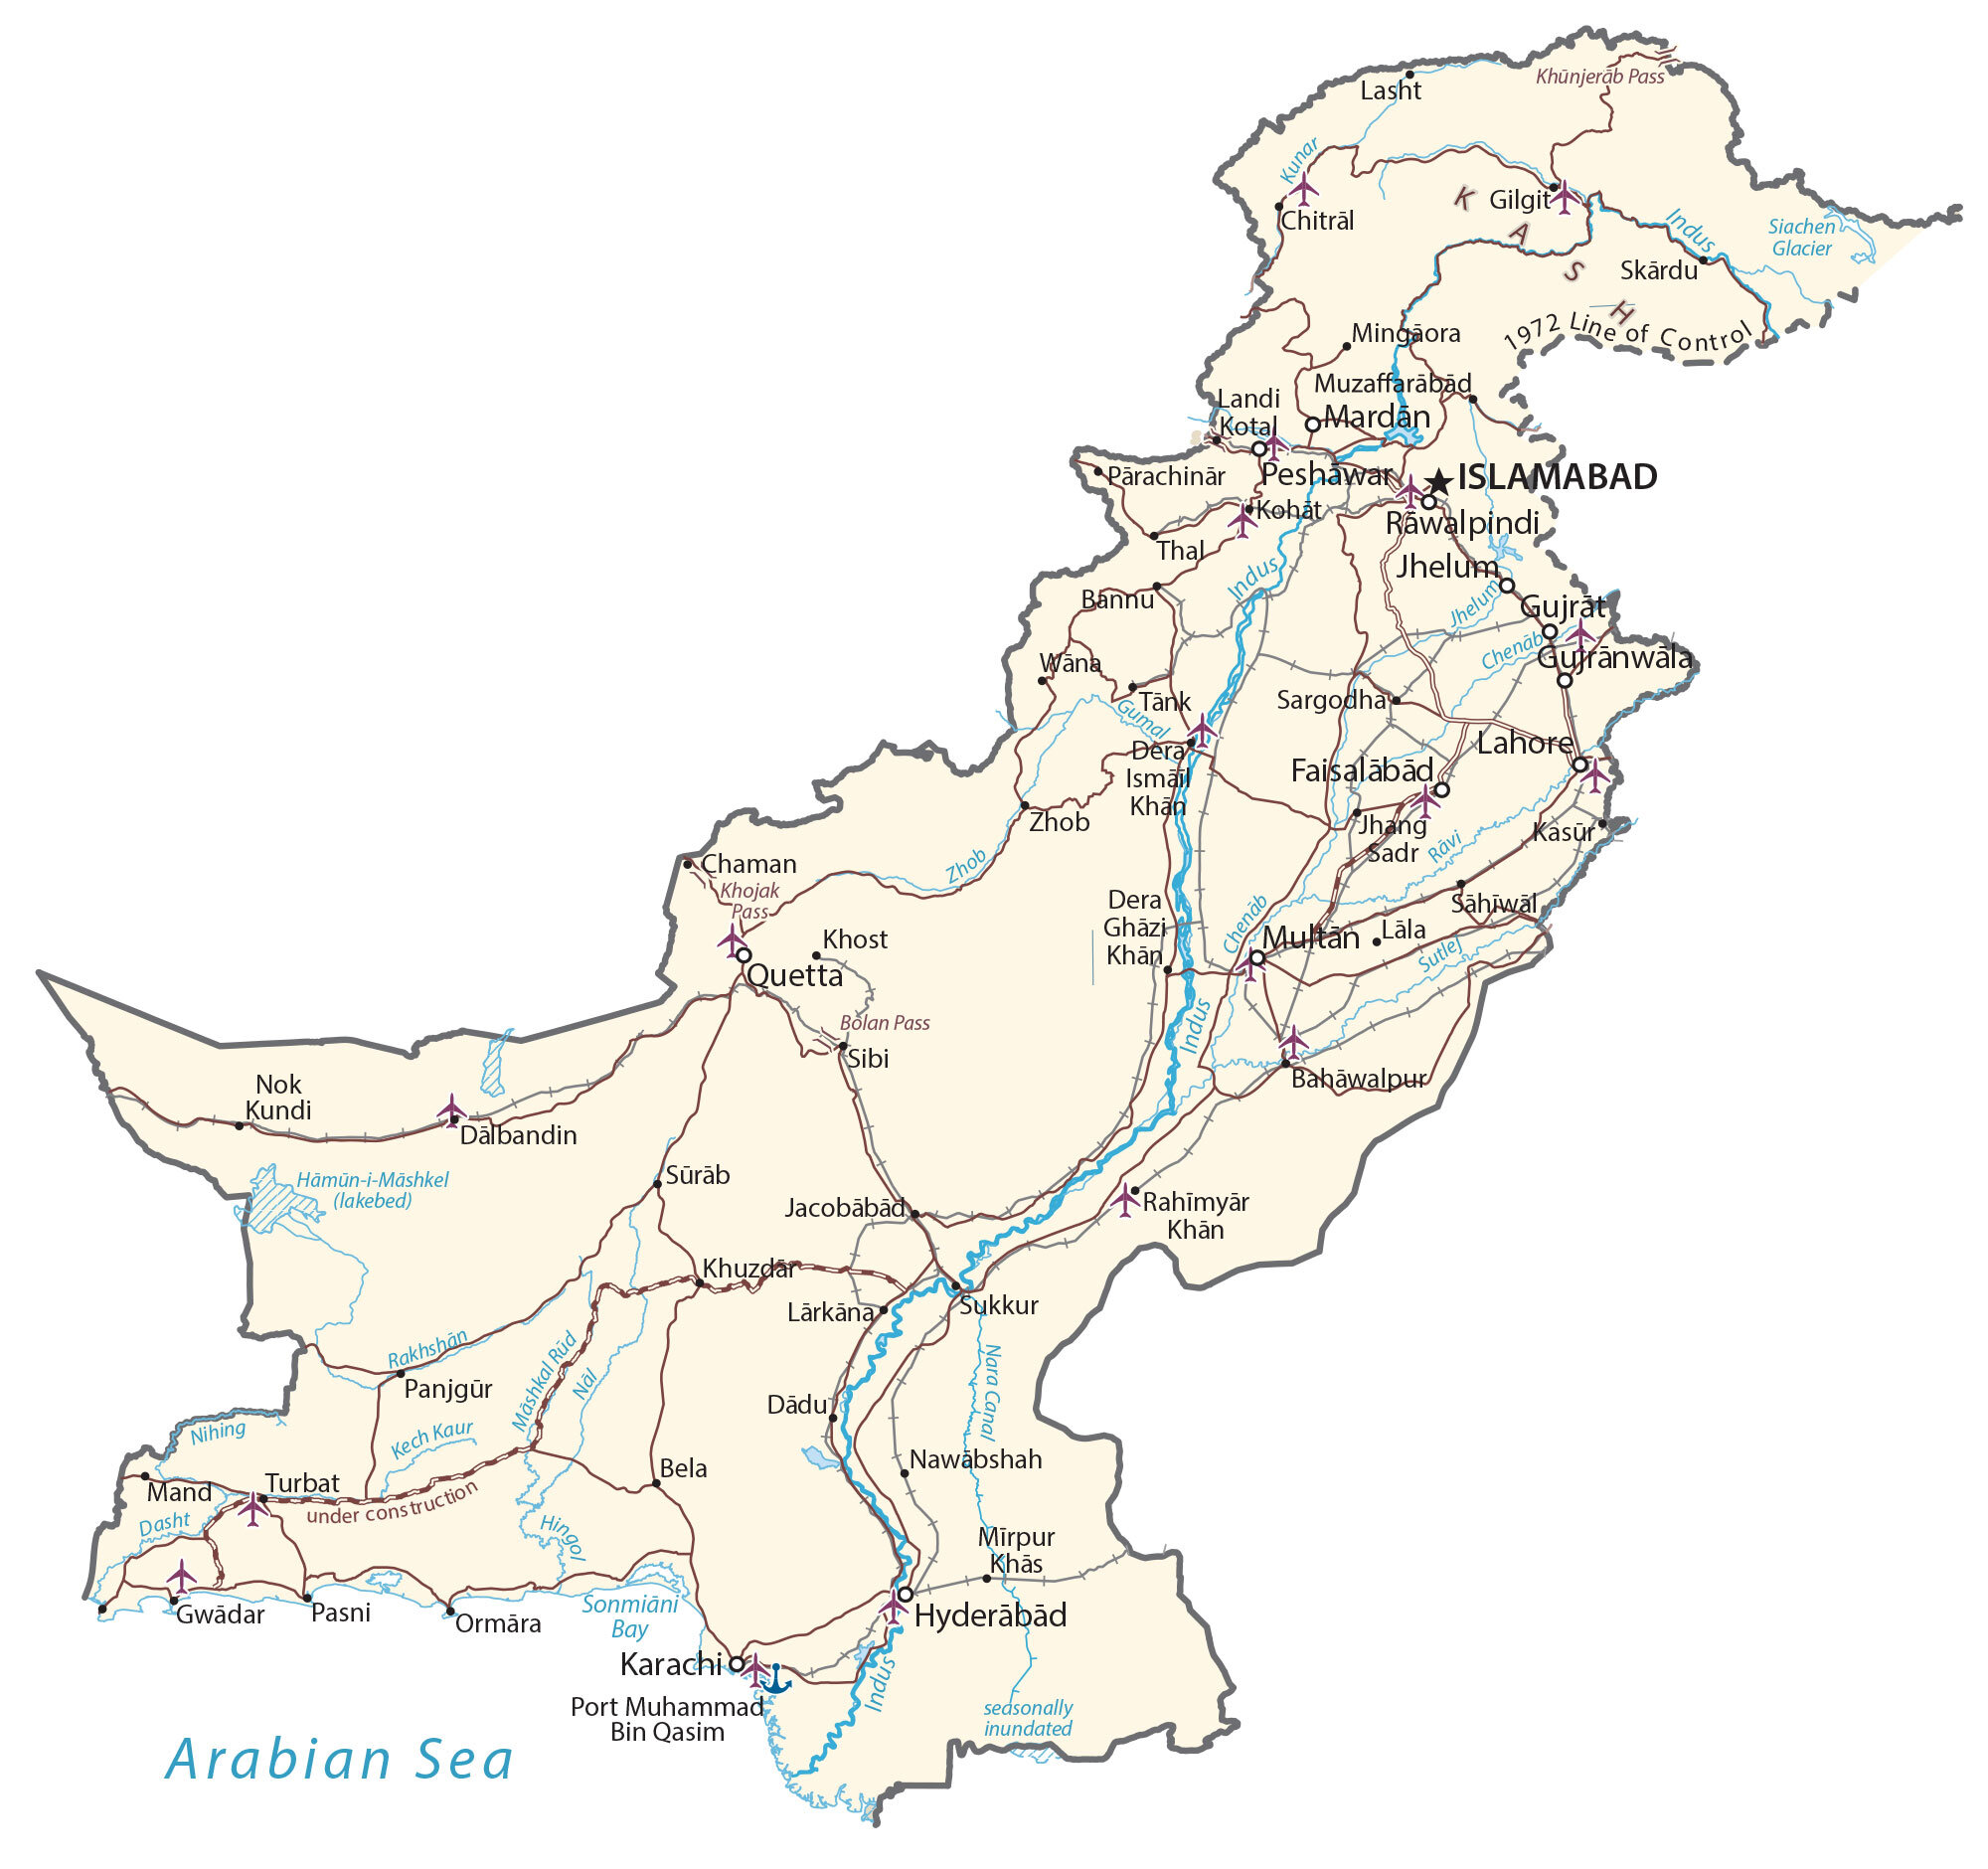 Pakistan Map With Provinces And Cities - Caresa Vivianne